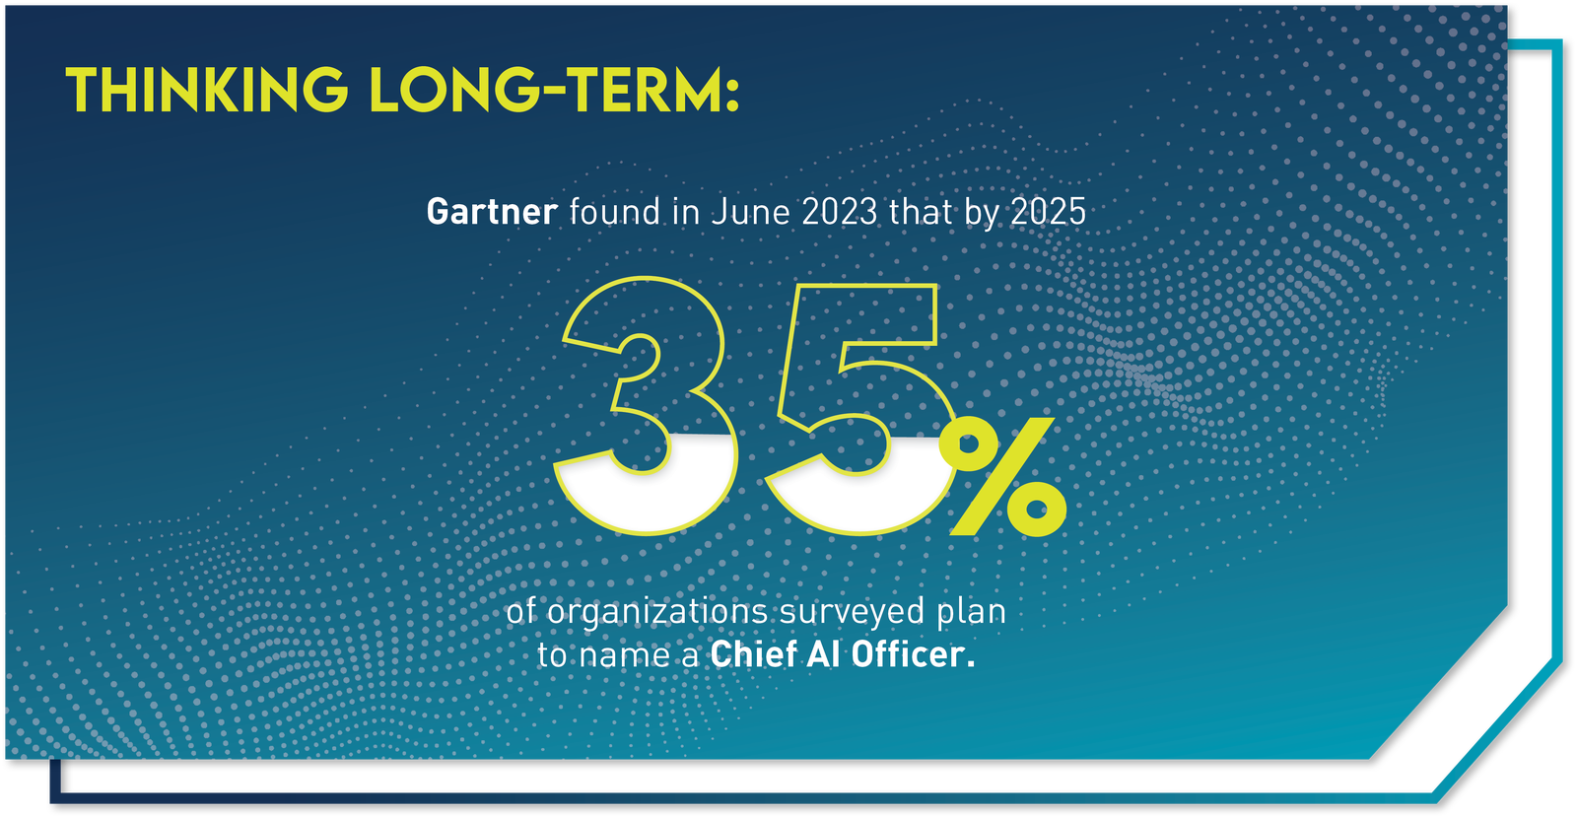 Gartner Stat about Chief AI Officers